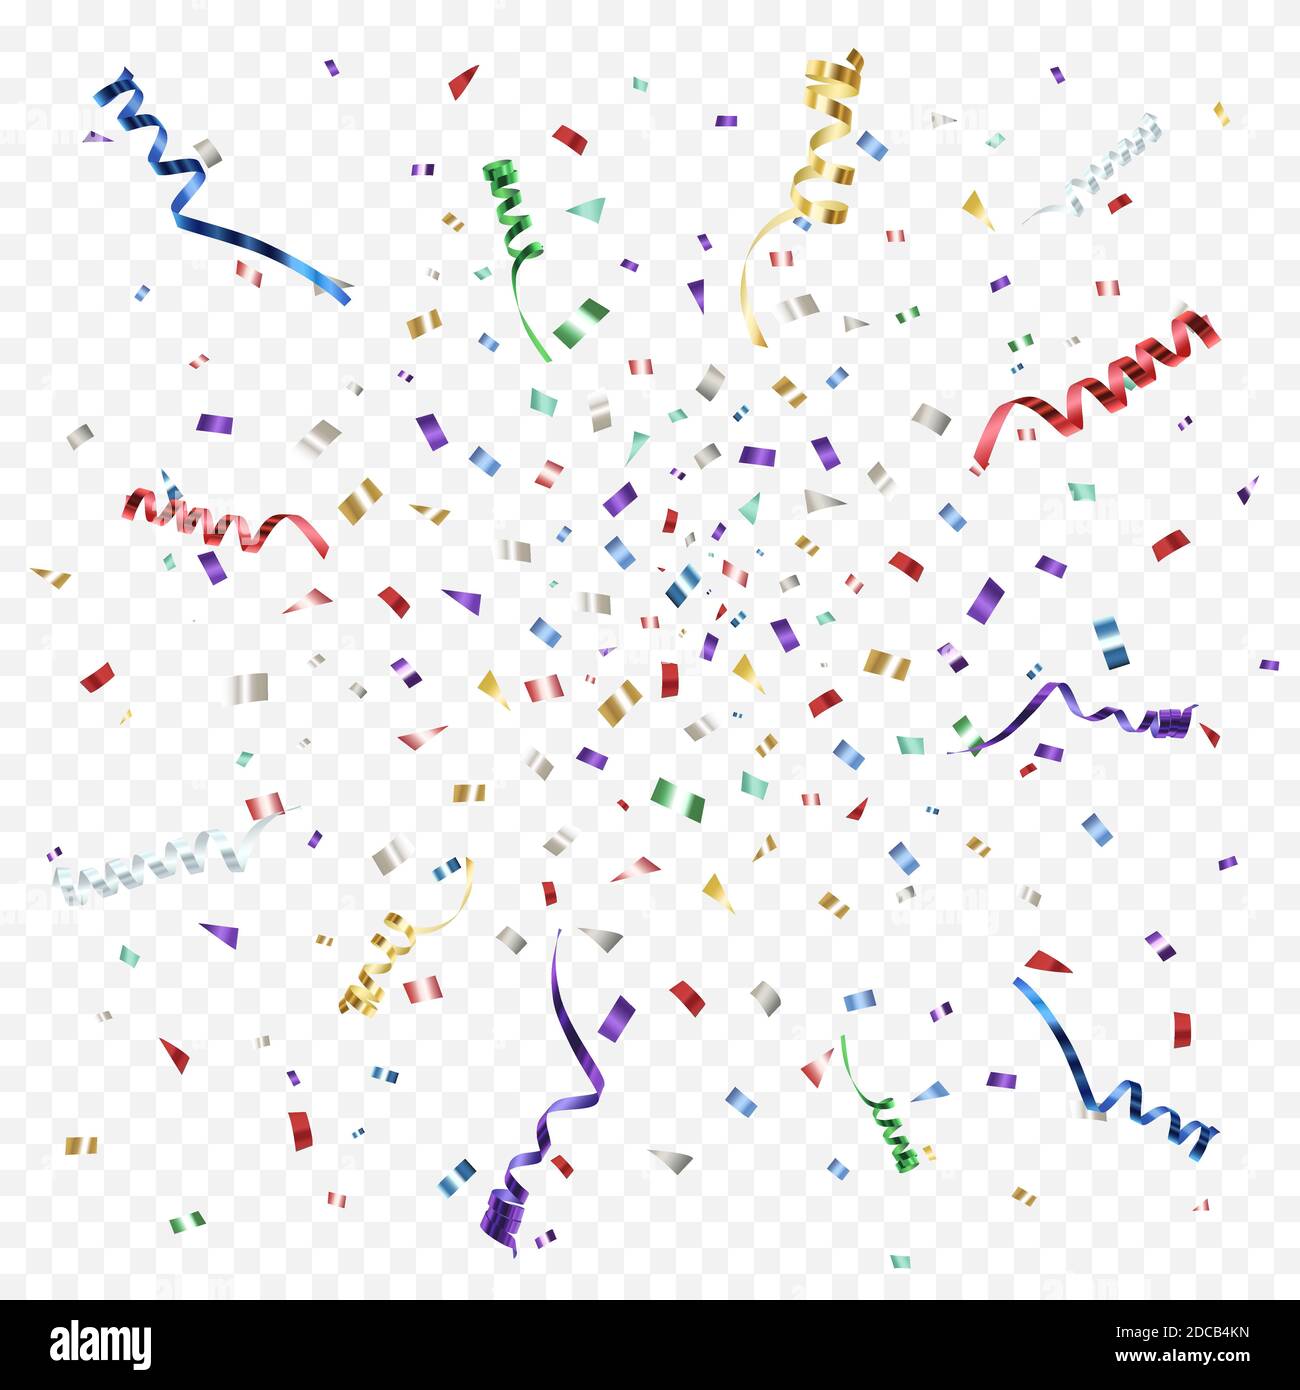 Colorful abstract design with ribbons and confetti. Stock Vector